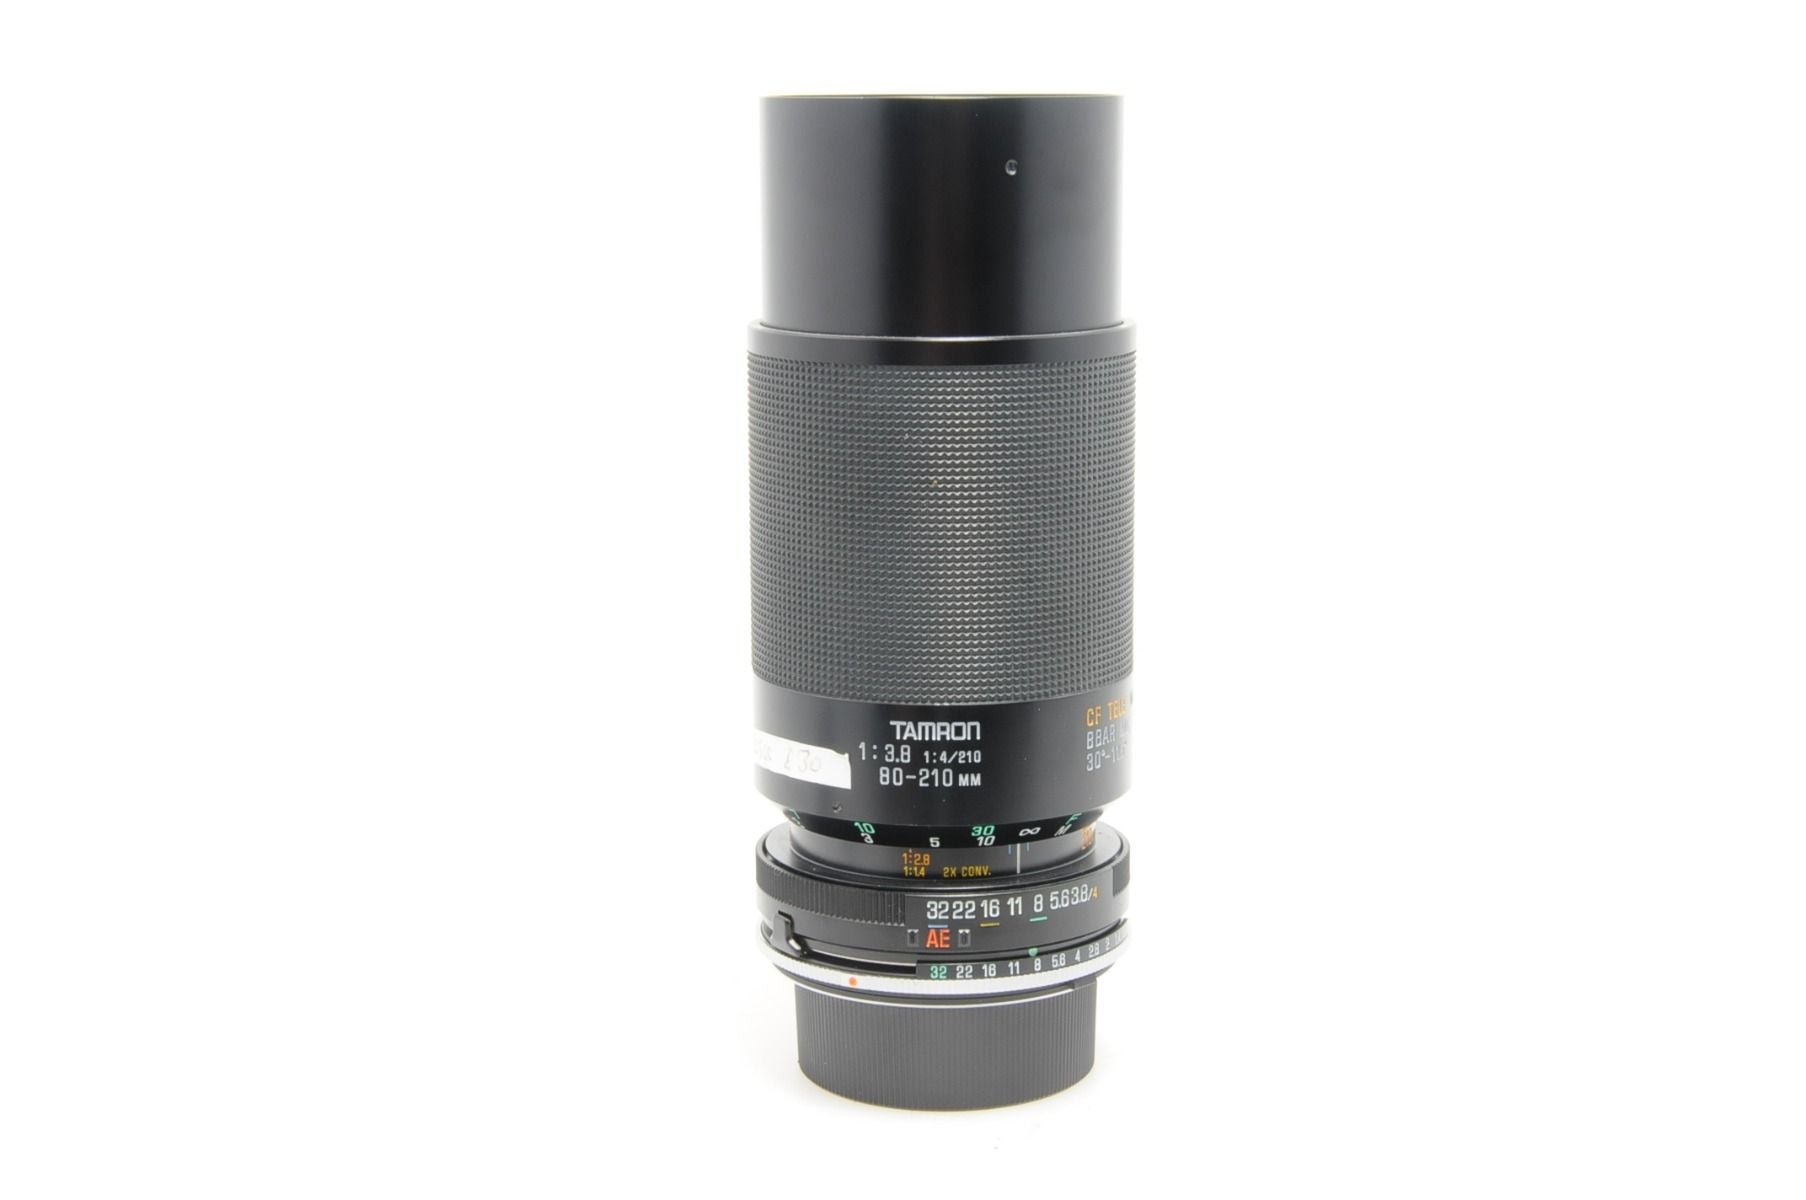 Used Tamron 80-210mm f3.8-4 Adaptall II lens with Minolta MD mount (Case, SH30500)